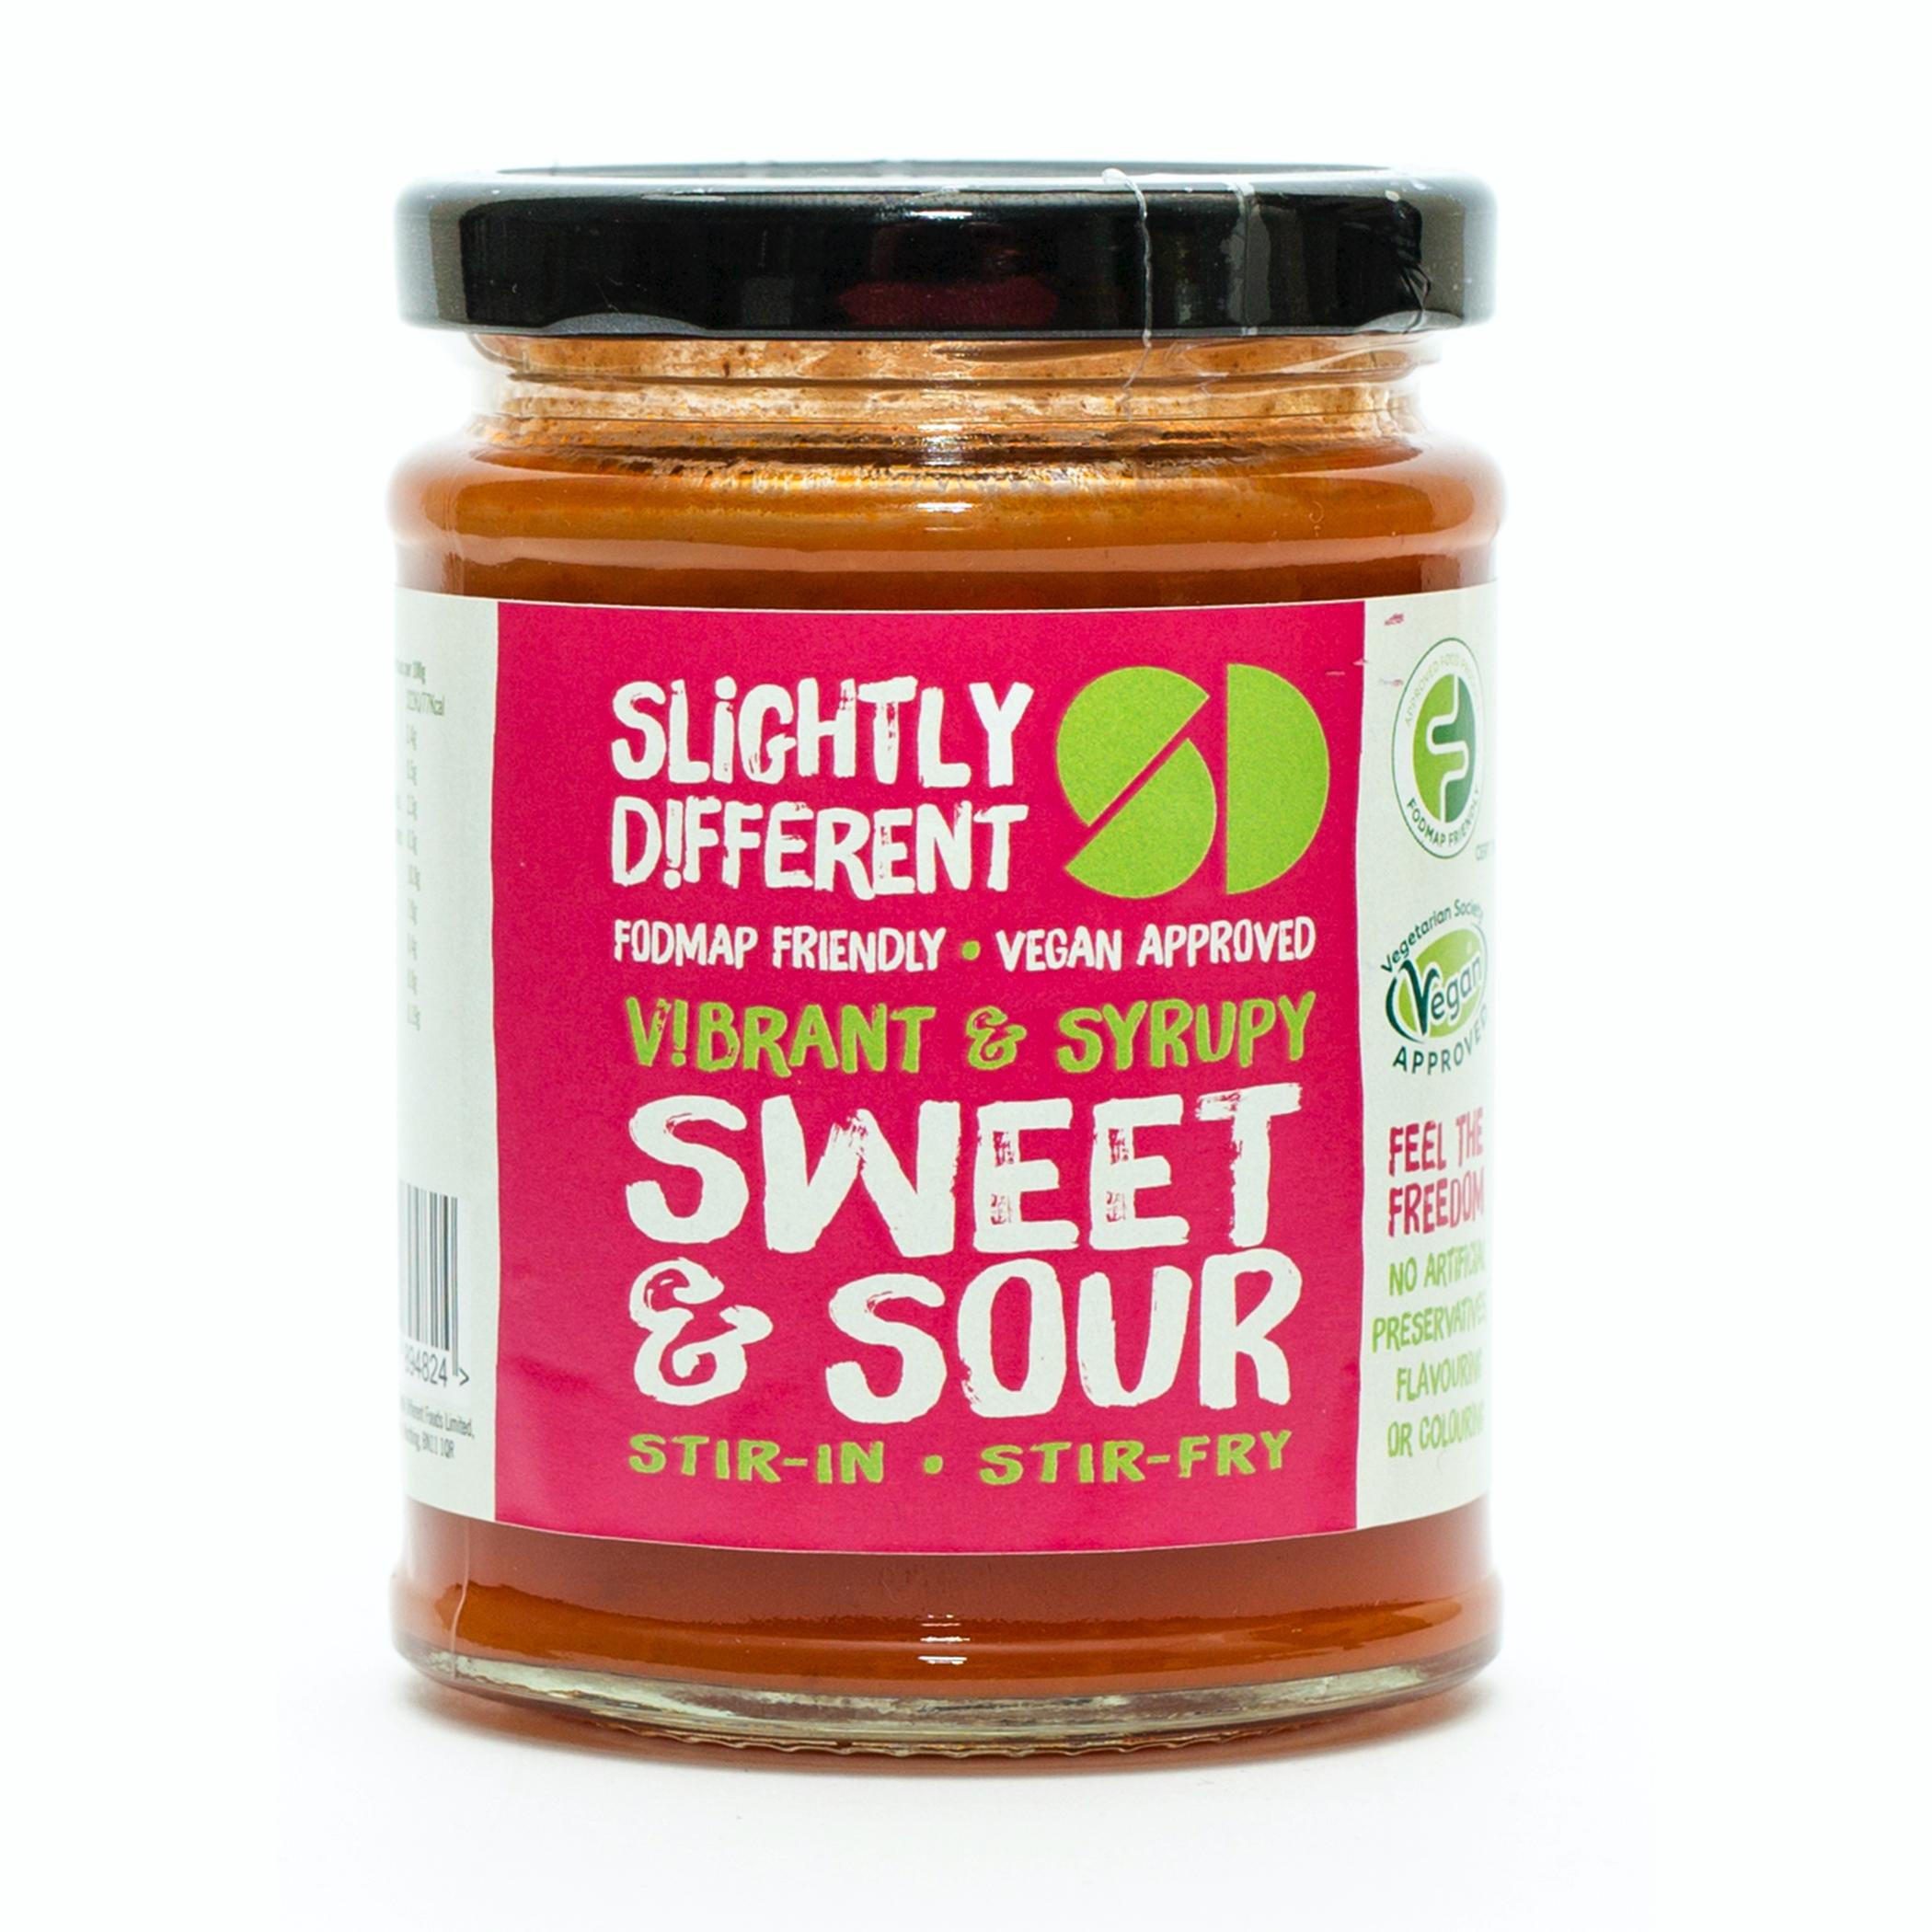 A jar of Slightly Different's Sweet & Sour Sauce